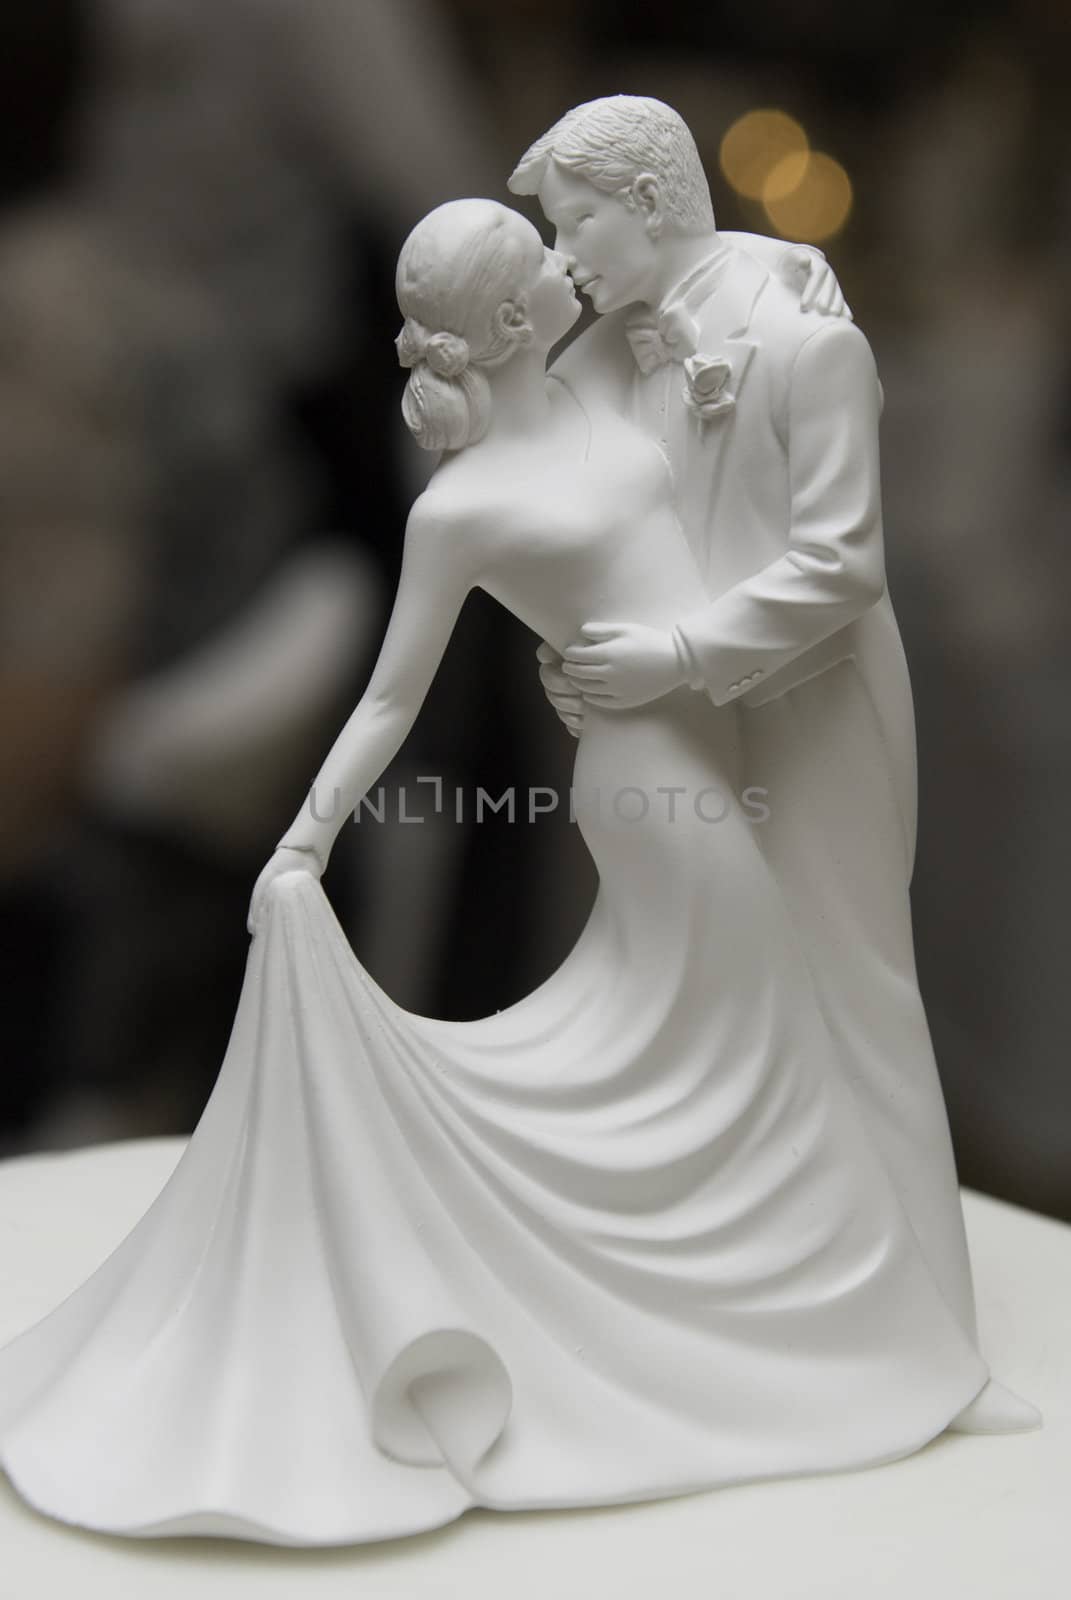 Figures on a wedding cake by Ansunette